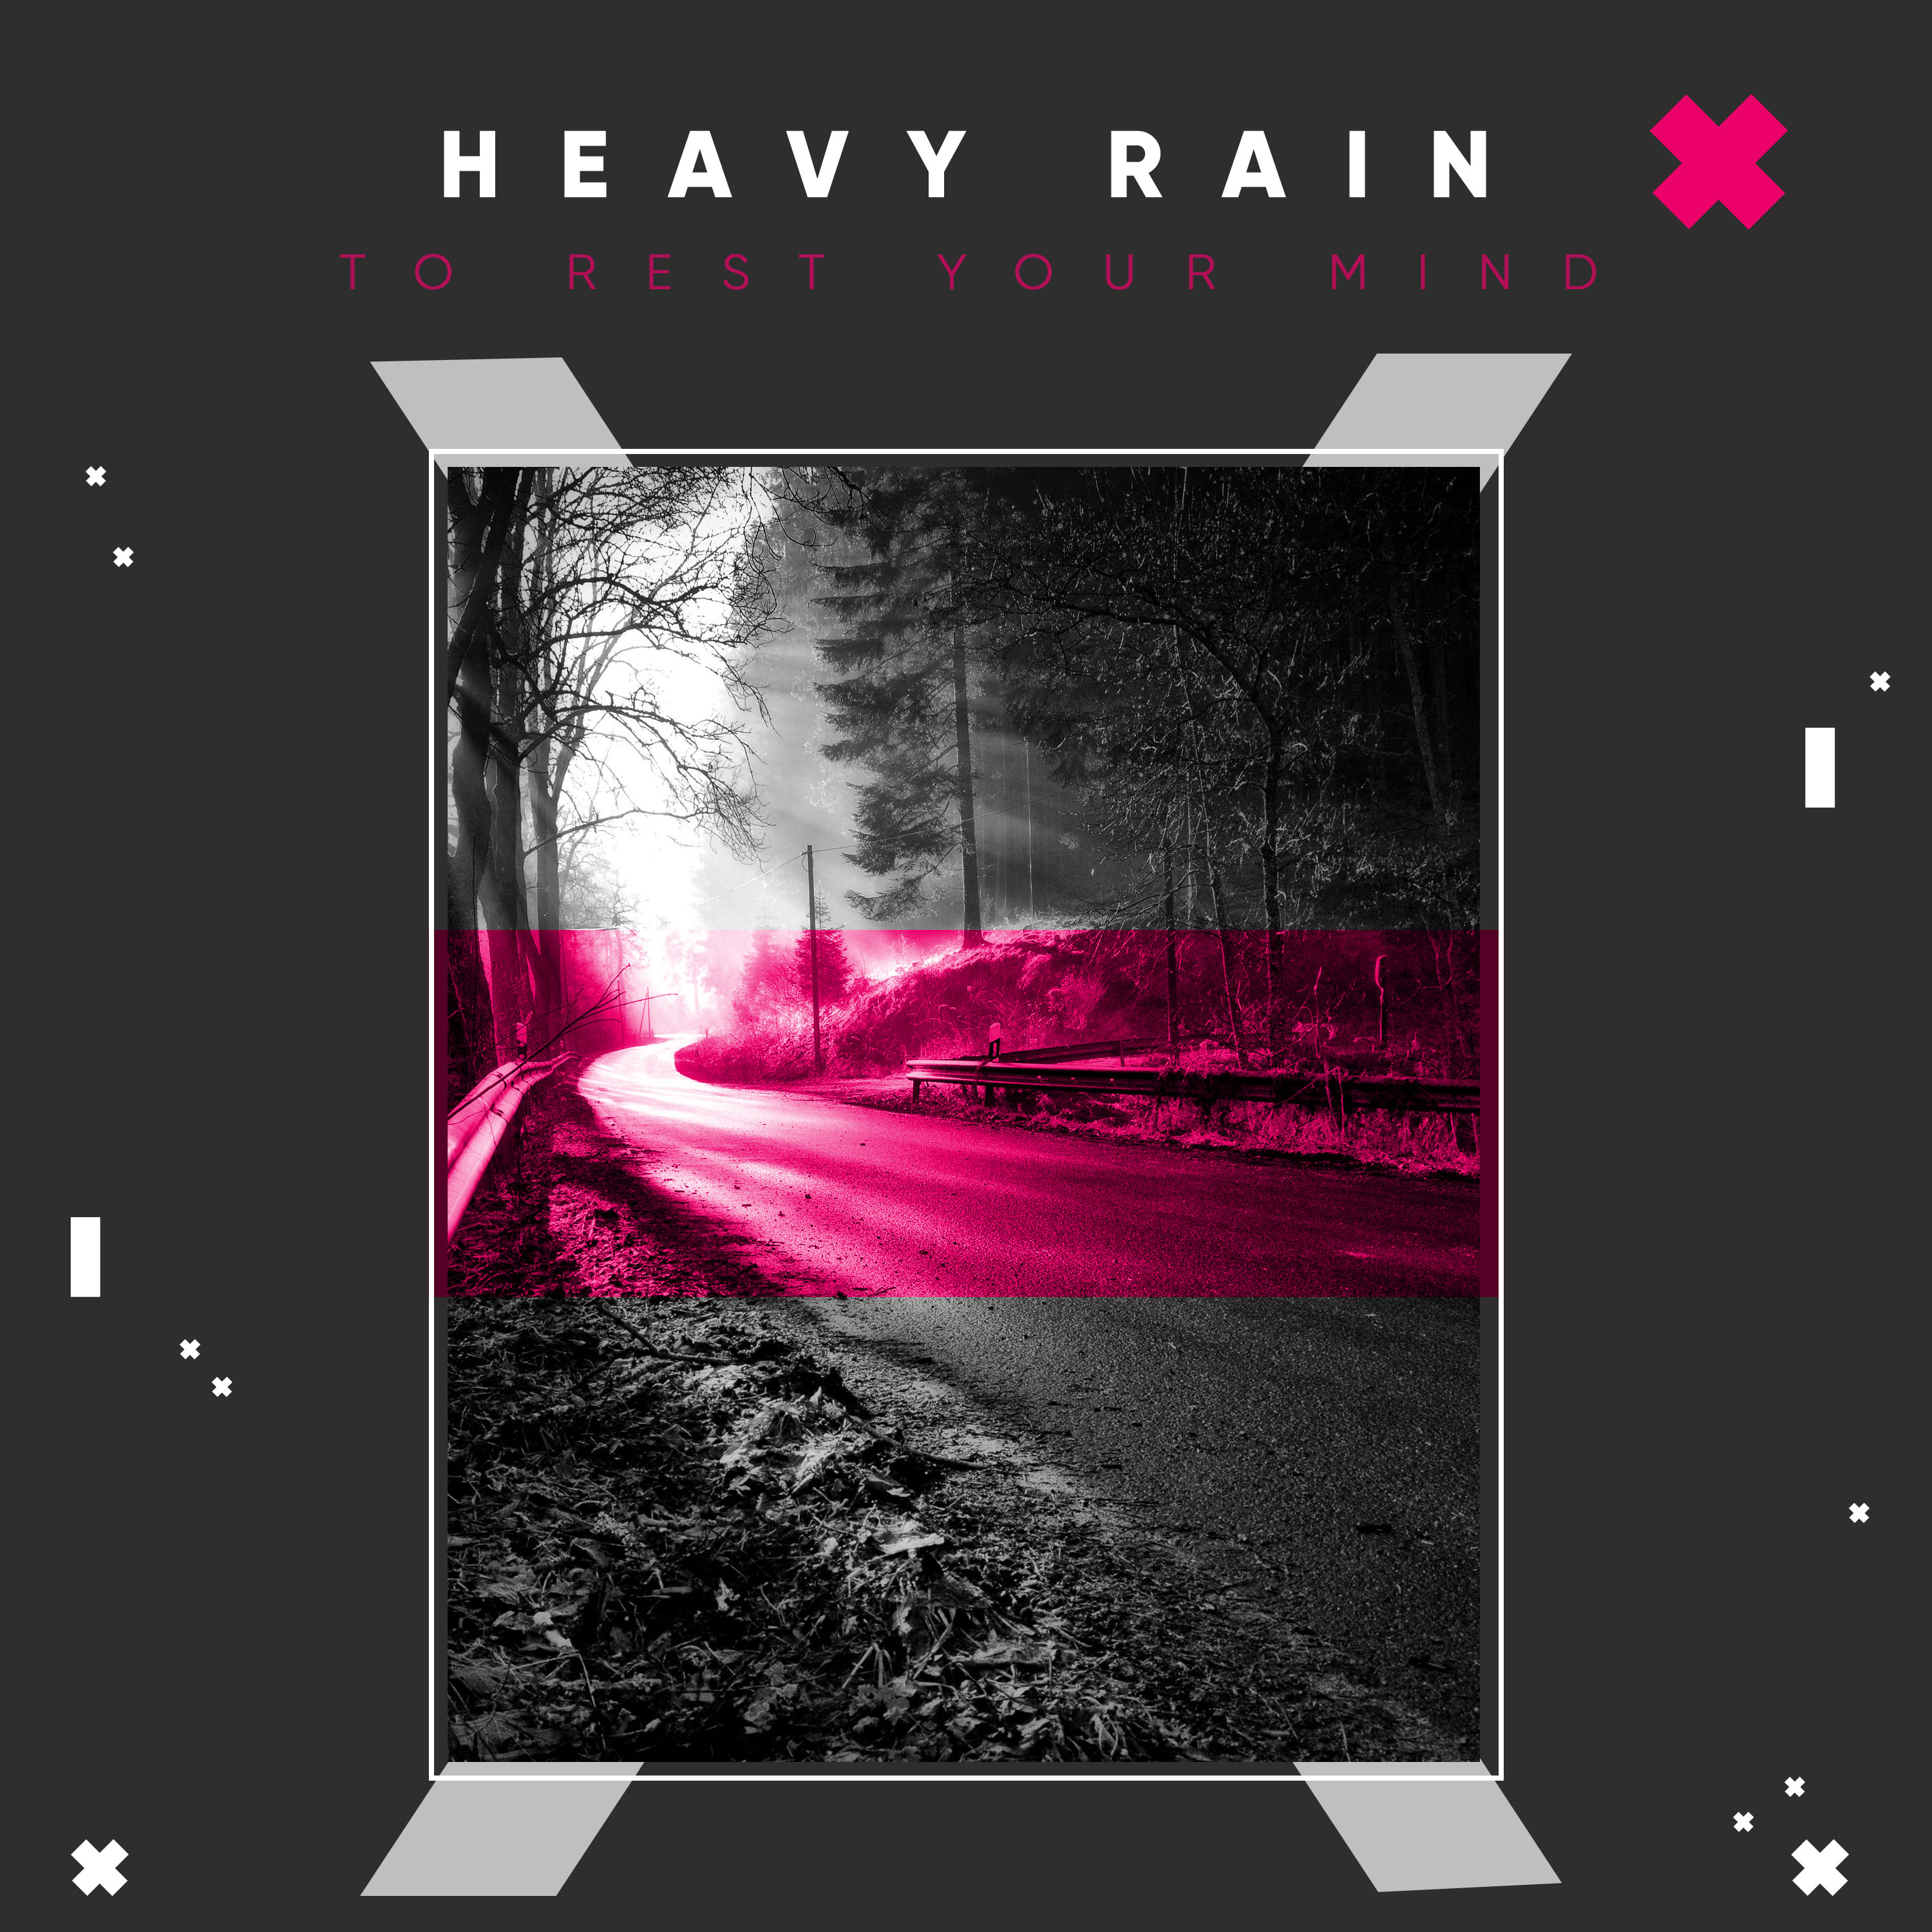 13 Heavy Rain Sounds to Rest Your Mind